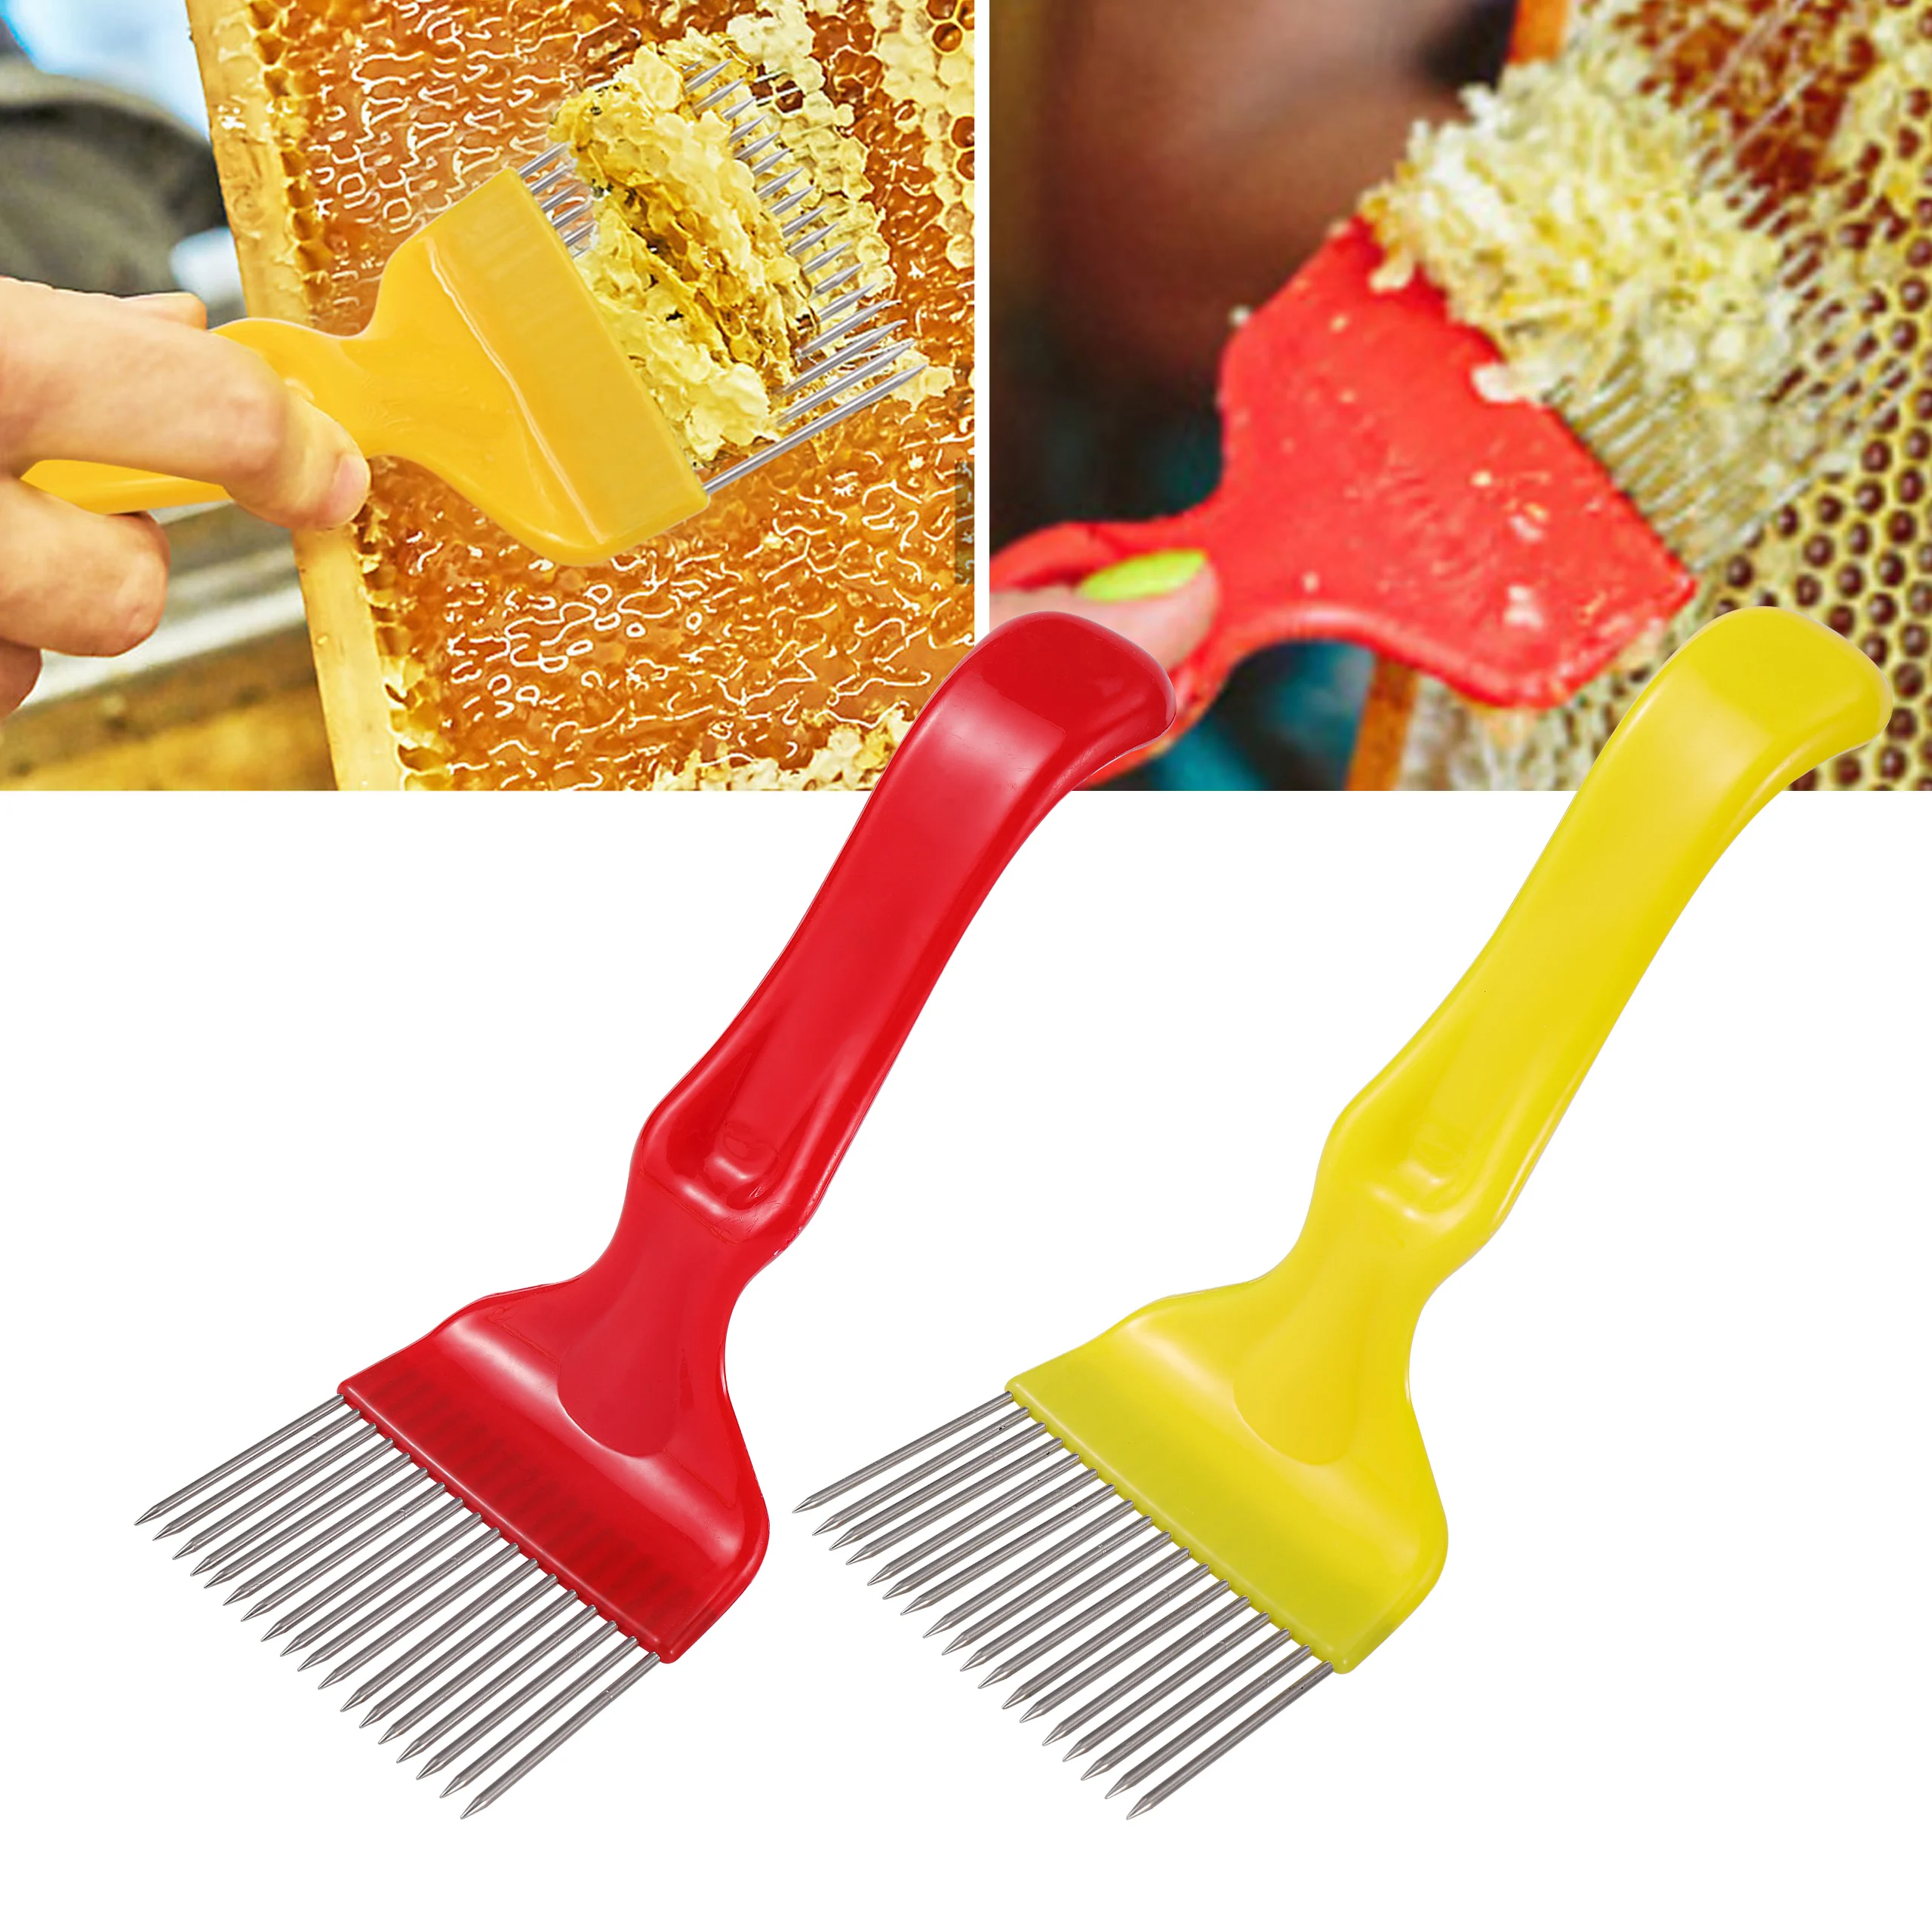 

18 Pin Stainless Steel Tines Comb Fork Cut Honey Straight Needle Uncapping Fork Honey Sparse Rake Shovel Bee Beekeeping Tool